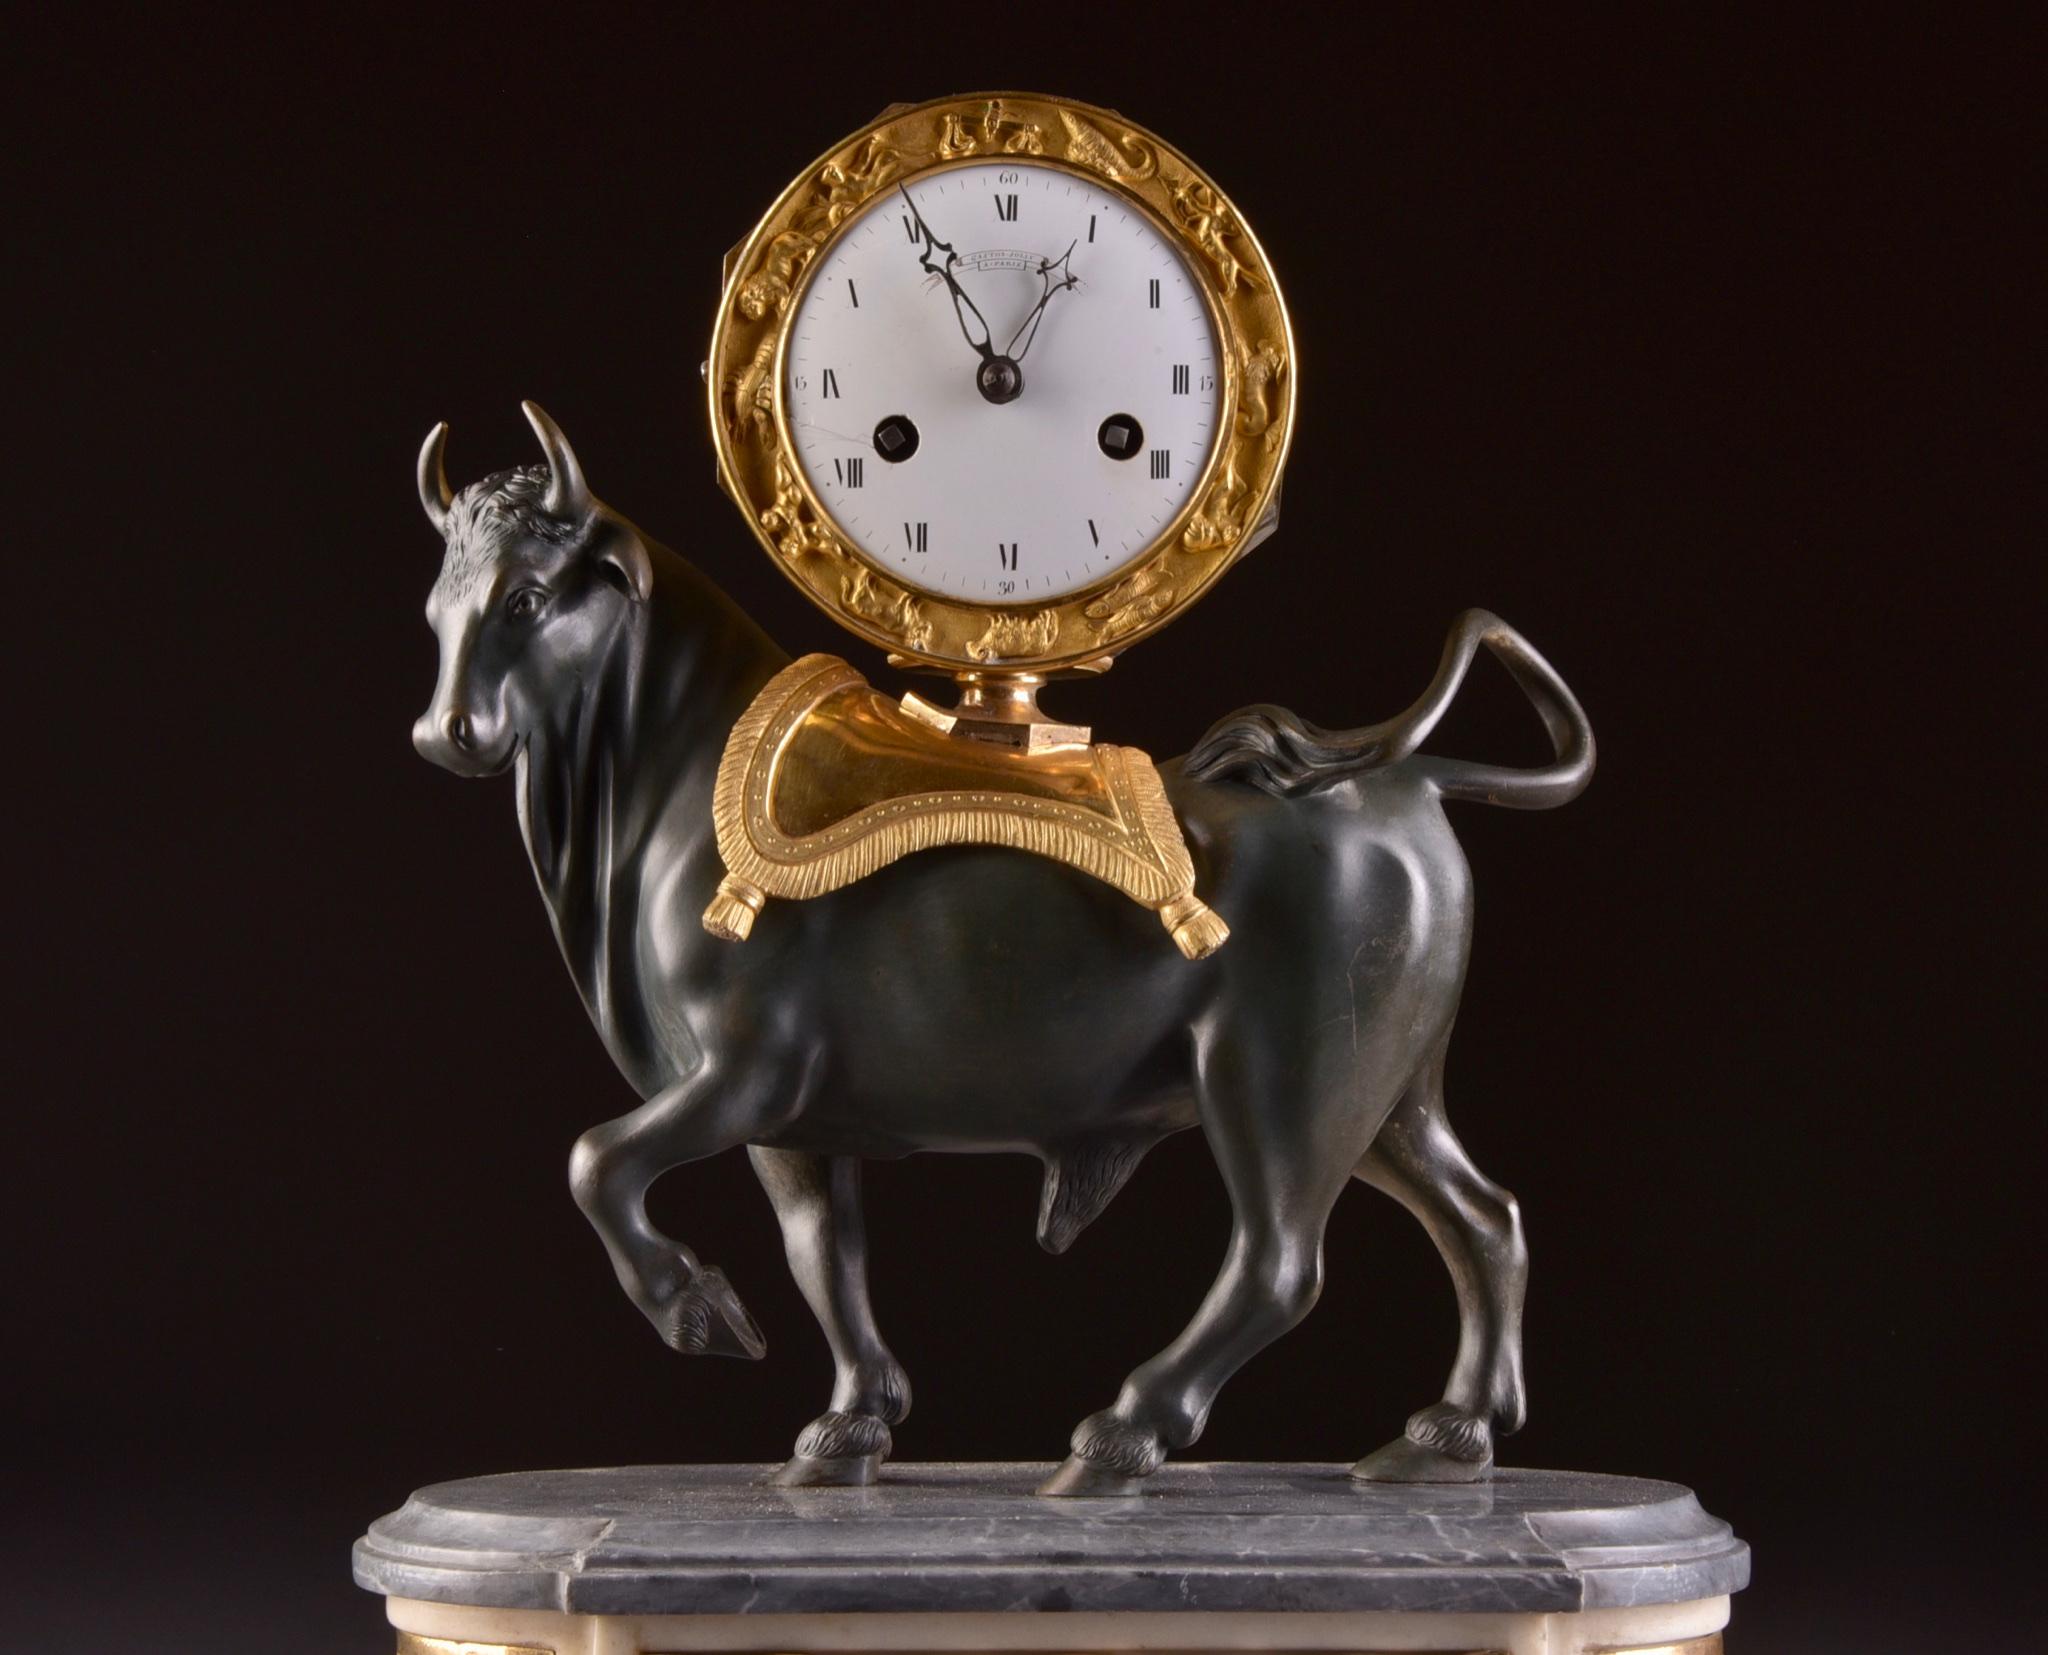 Rare high quality and prestigious pendula, with a large bull
France, circa 1780-1795
Power reserve: 8 day movement striking: Half hour, one bell
Dimensions: 42 x 31 x 18 cm
Weight: 18 kg. 

Shipping costs will be determined in